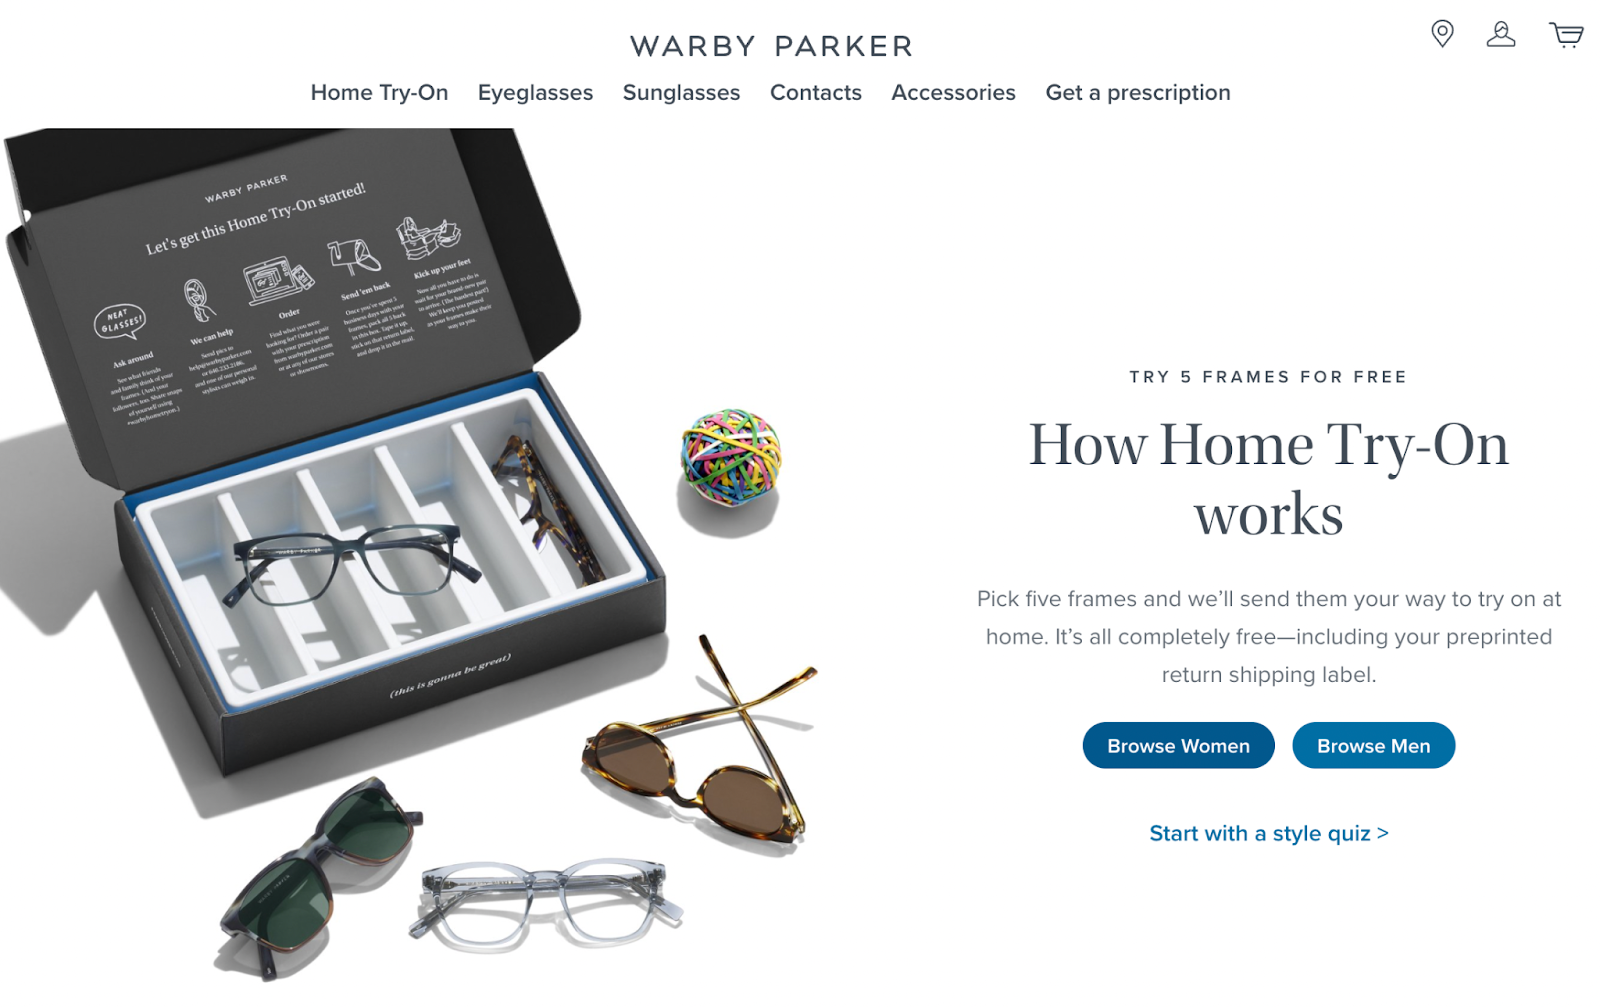 warby%20parker.png?width=1600&height=1007&name=warby%20parker - Sampling Marketing — The Complete Guide